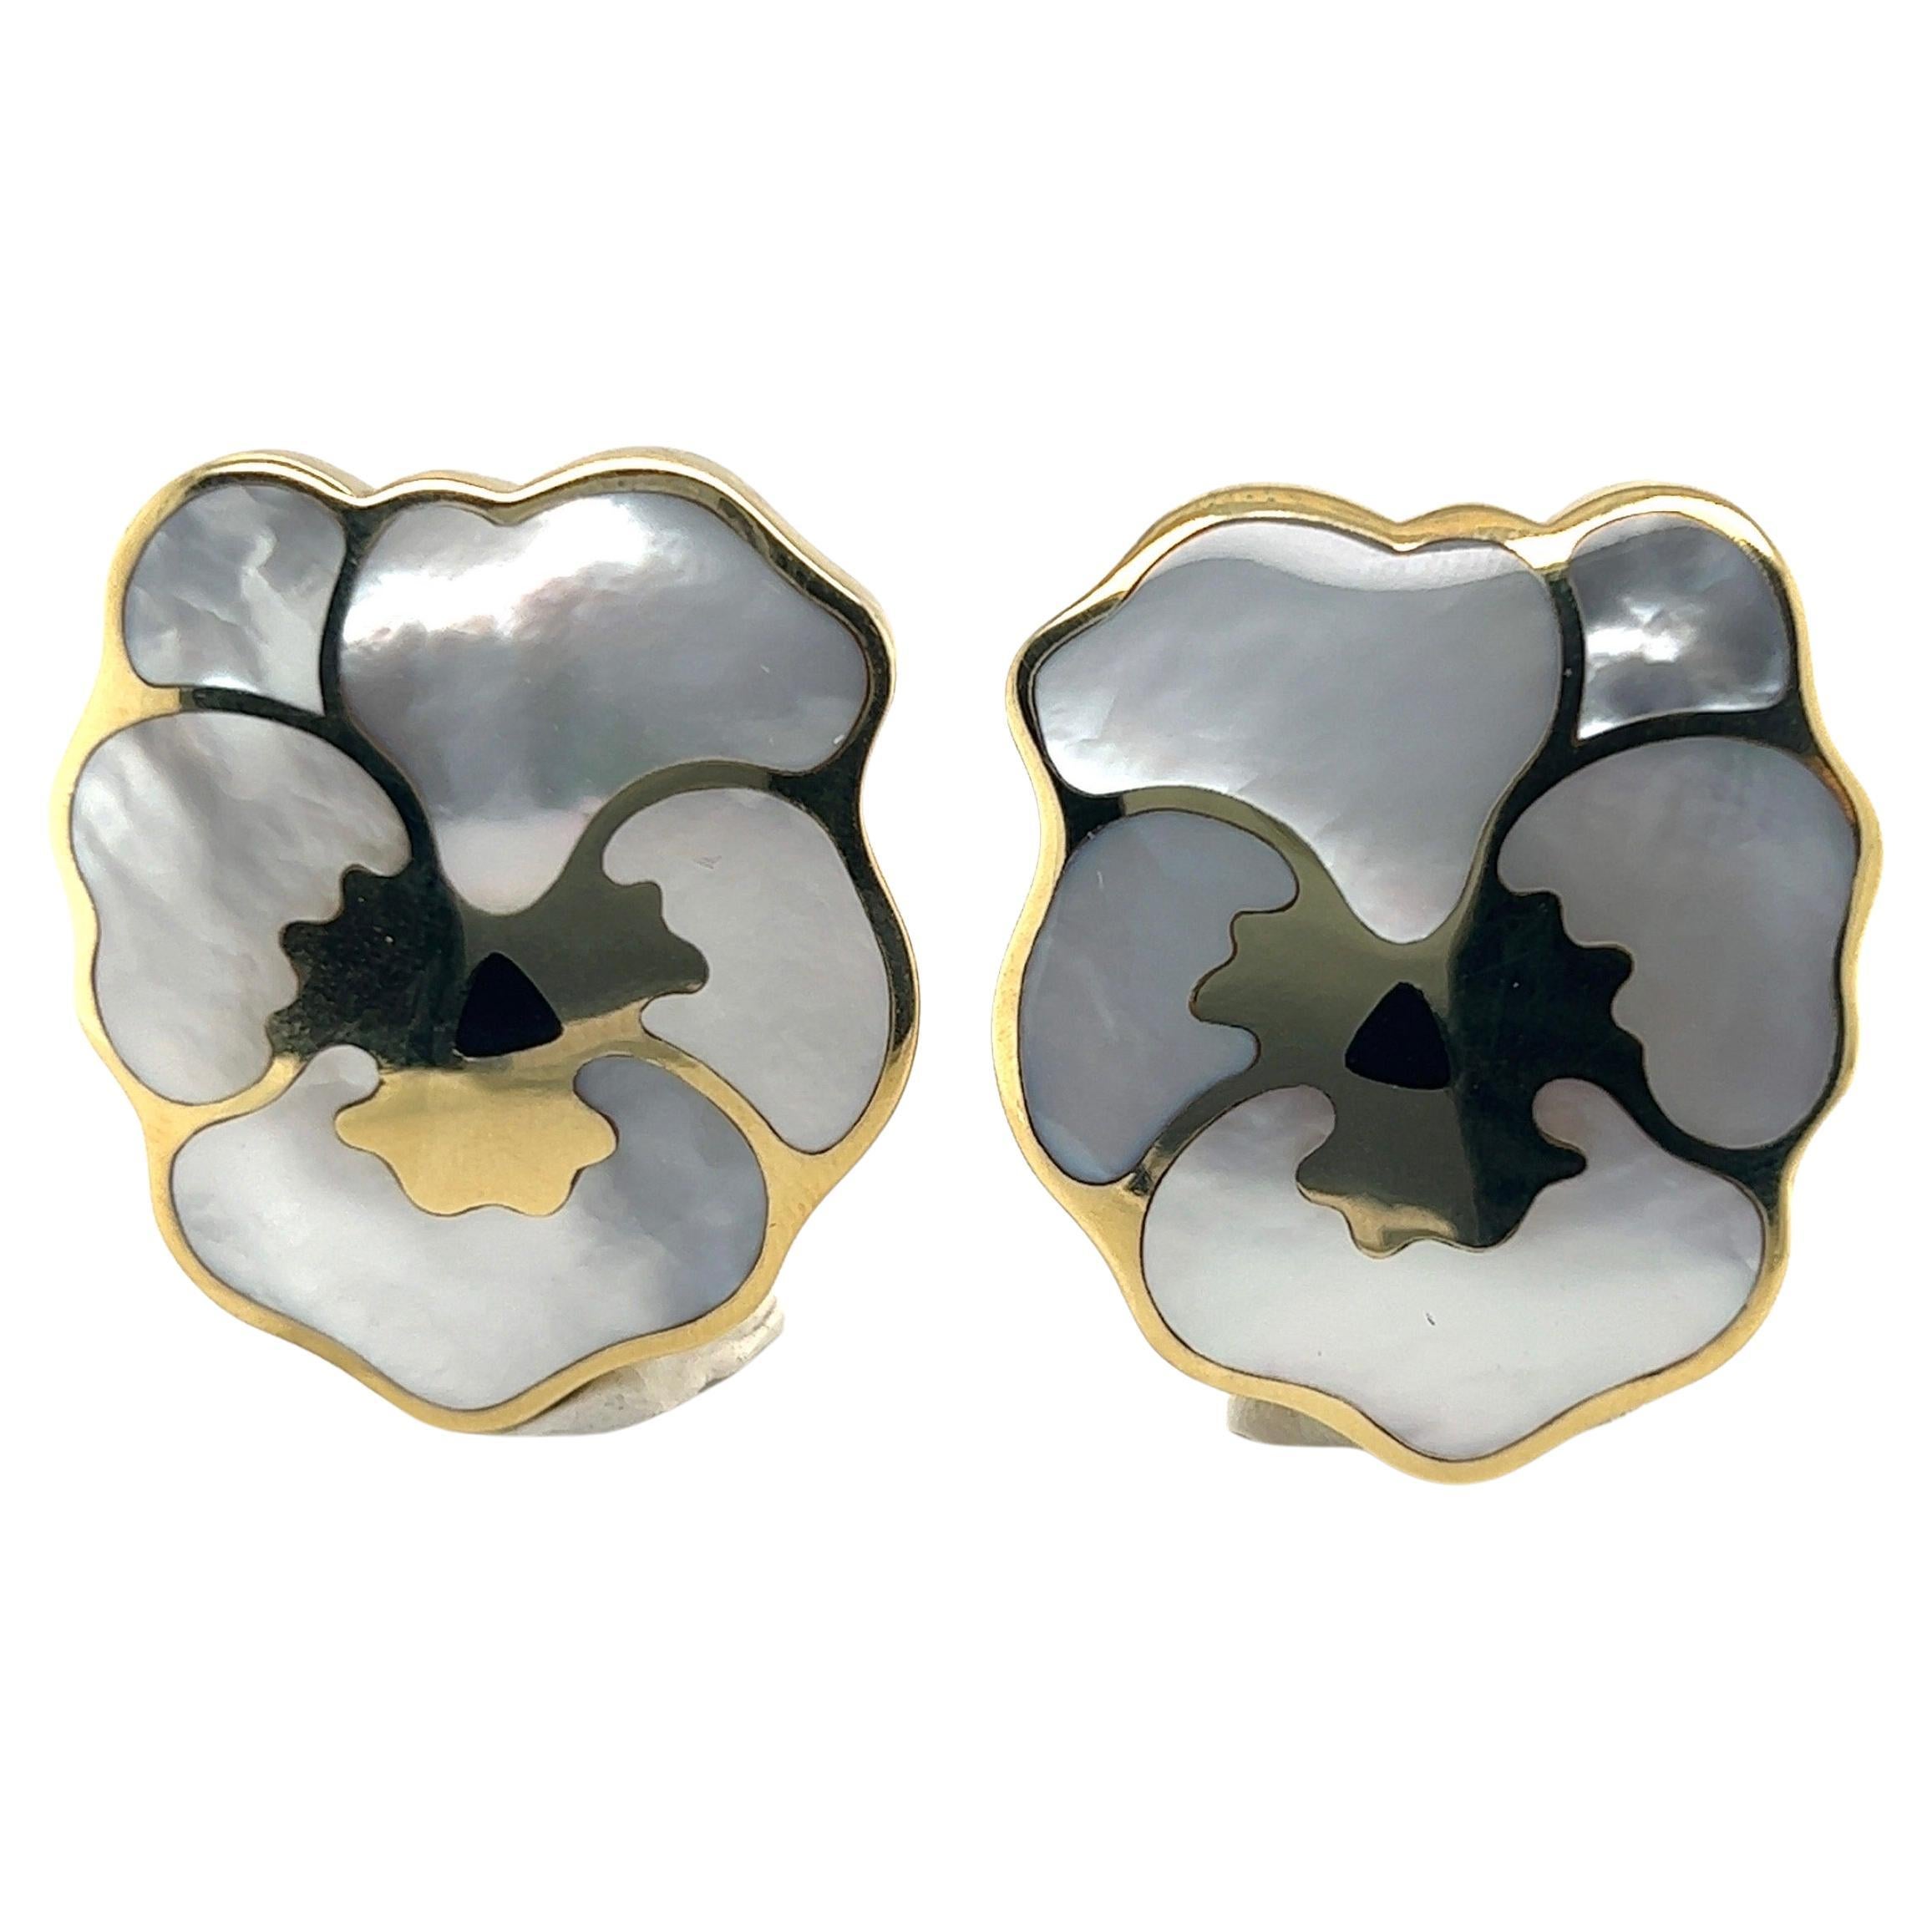 18 Karat Gold Mother of Pearl and Onyx Pansy Earrings by Tiffany & Co.